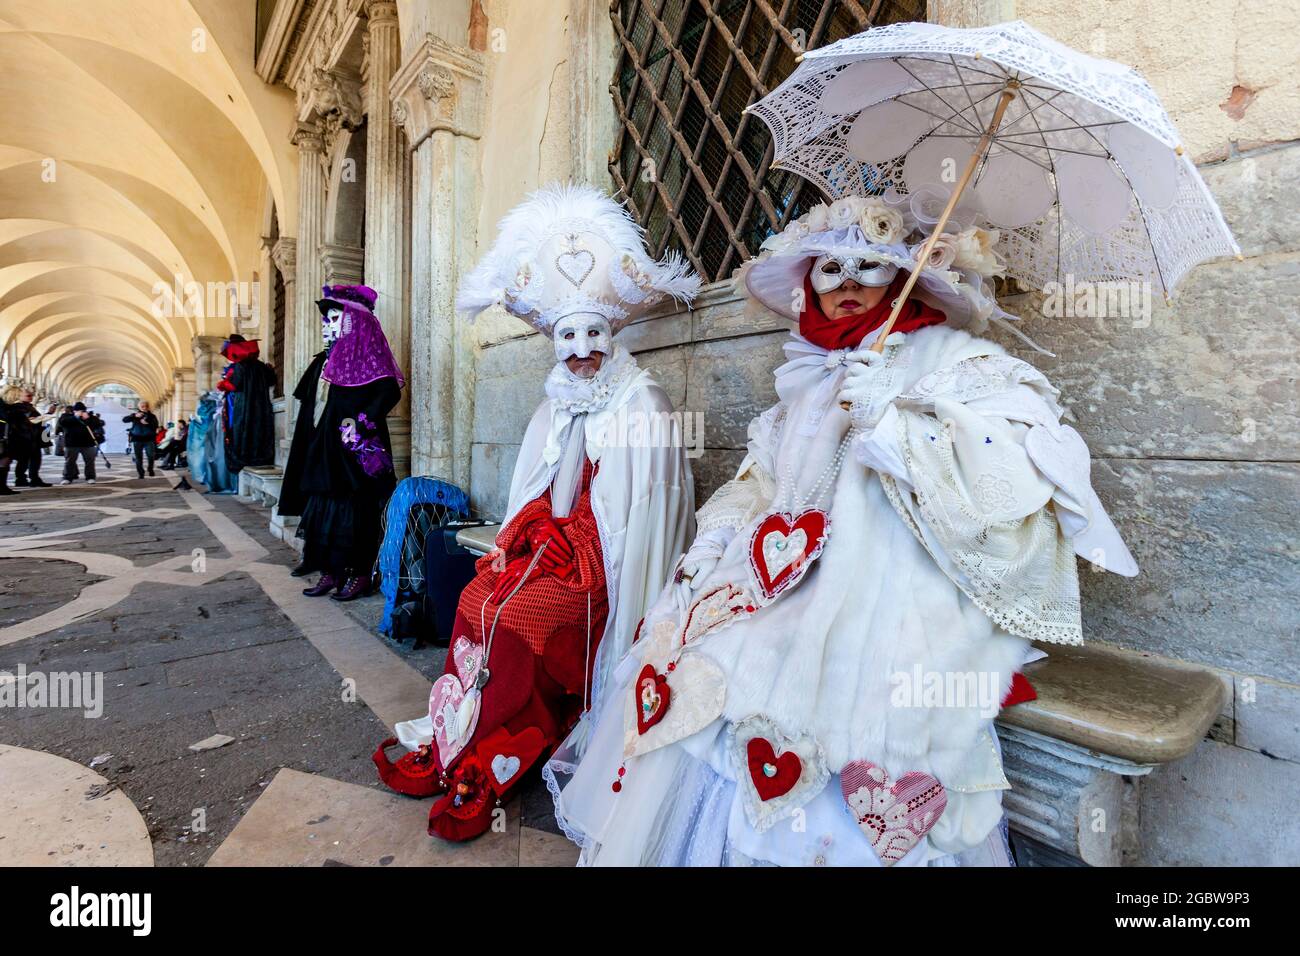 People In Costume At The Venice Carnival, Venice, Italy. Stock Photo